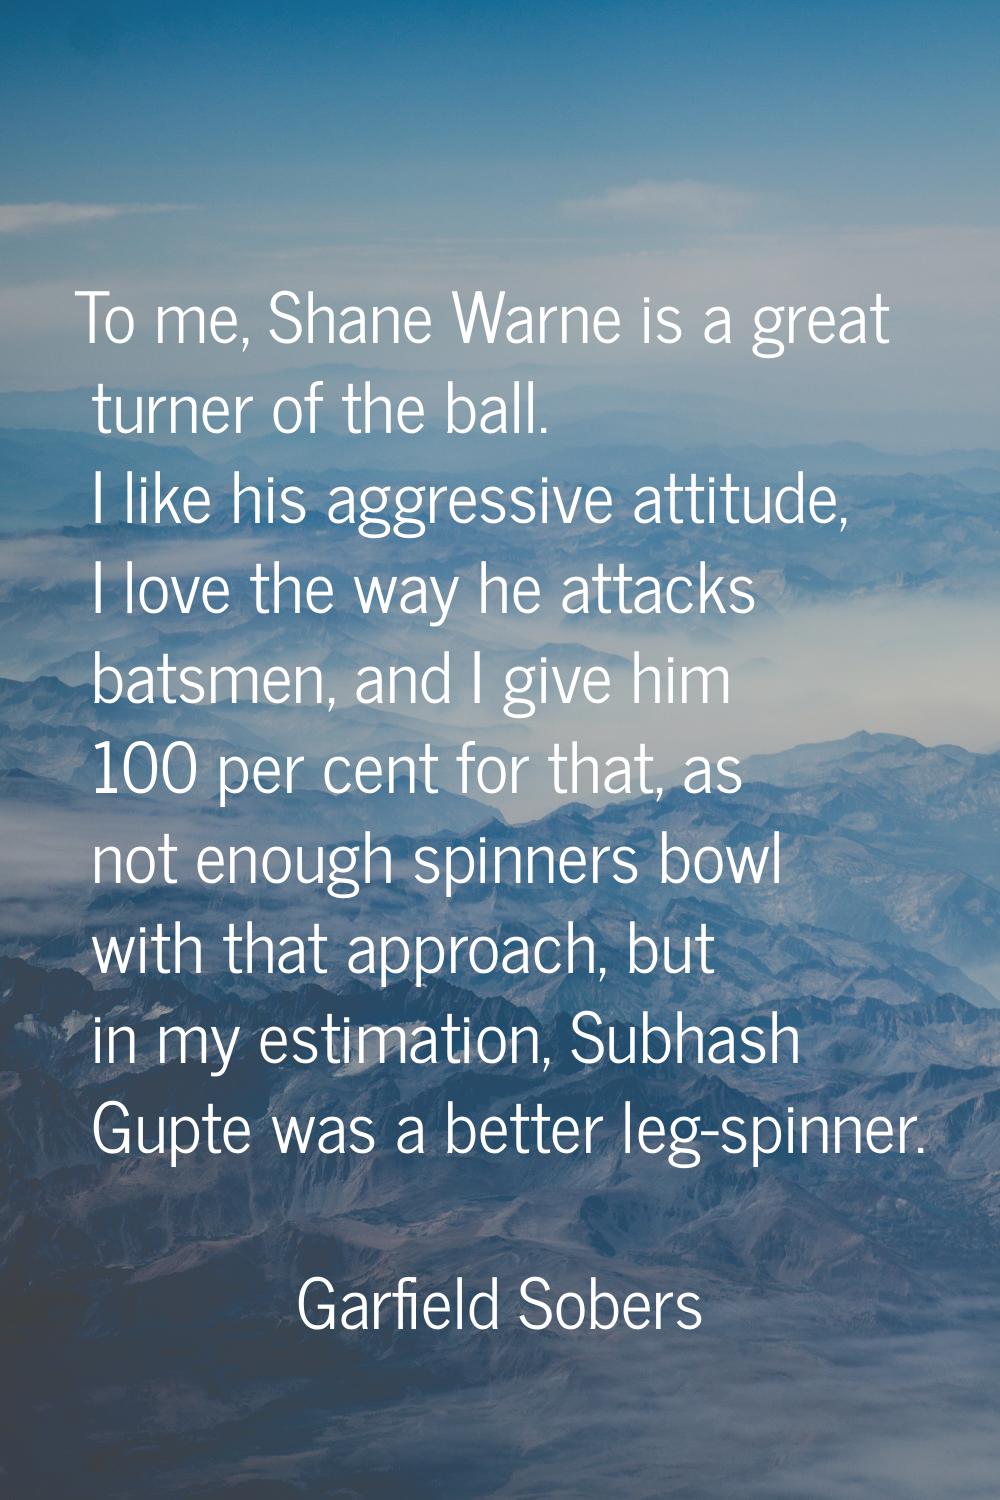 To me, Shane Warne is a great turner of the ball. I like his aggressive attitude, I love the way he